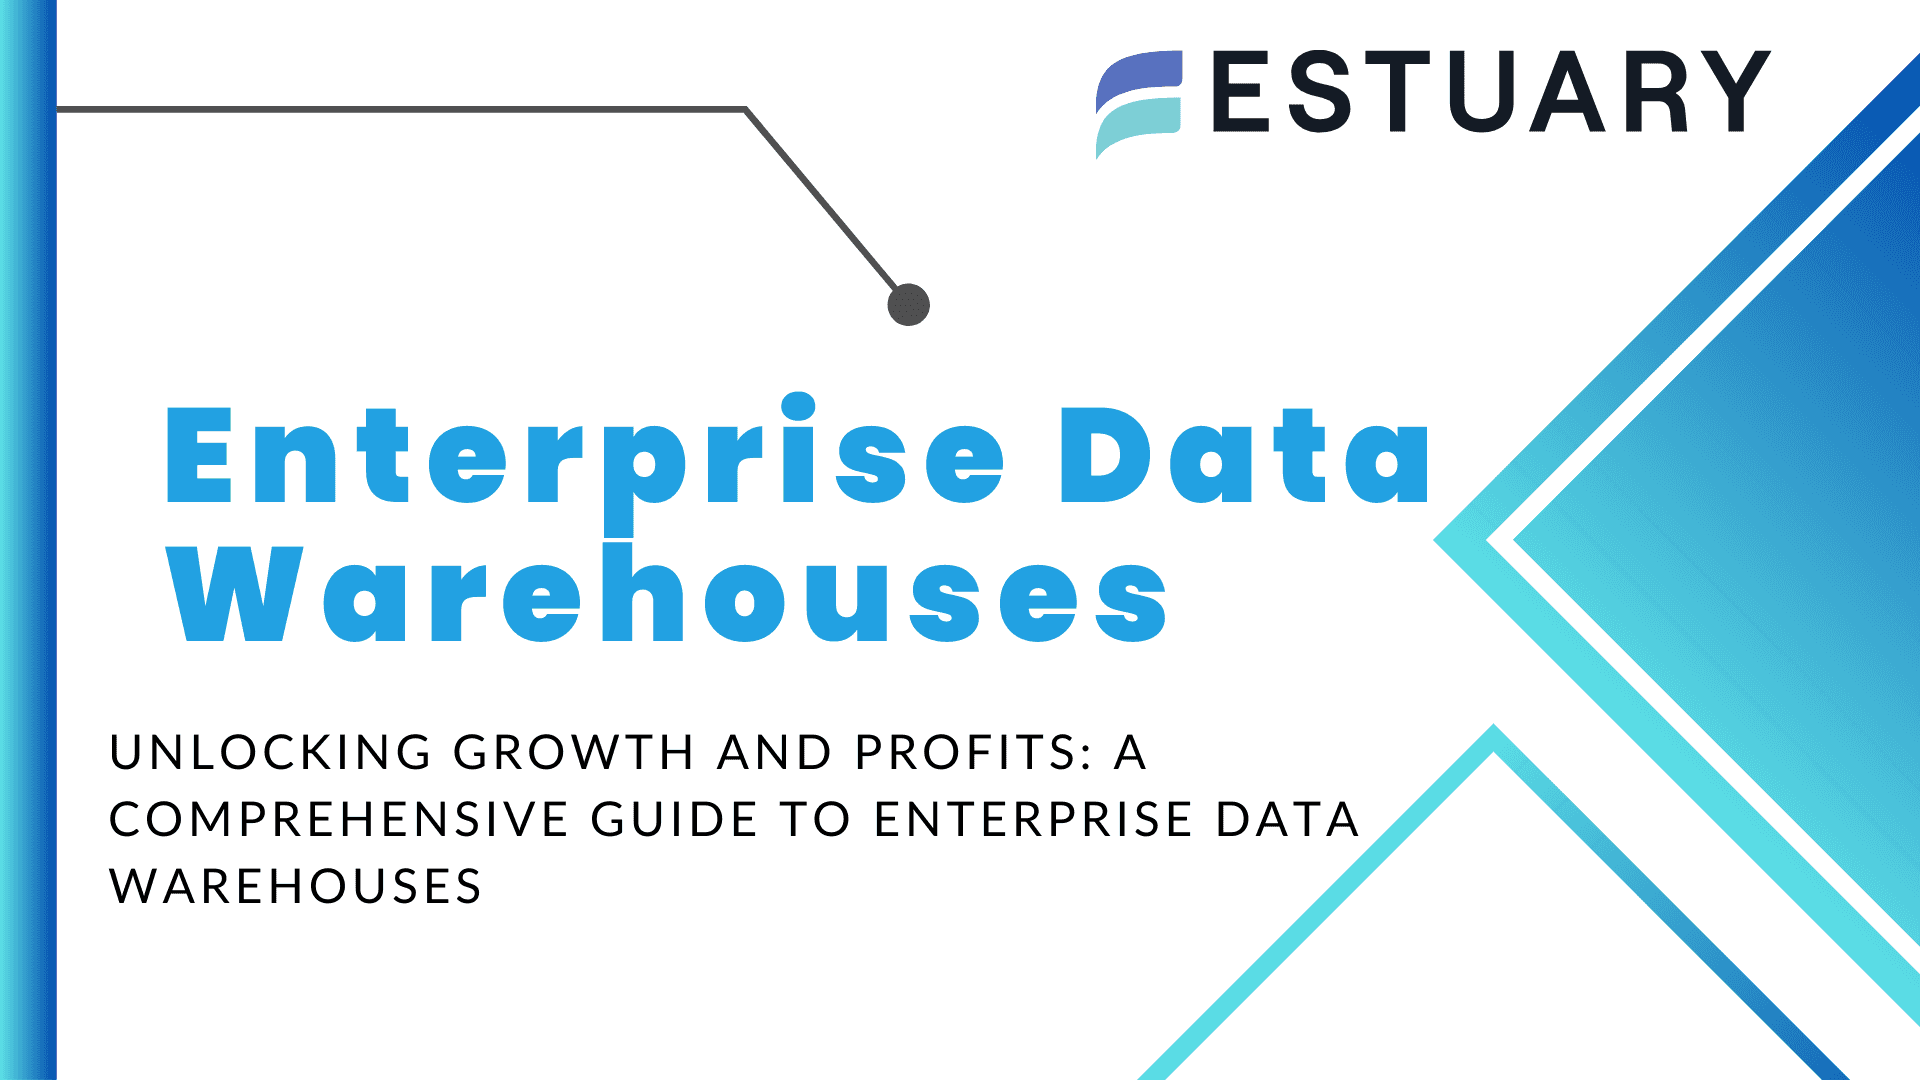 Enterprise Data Warehouses: The Complete Guide